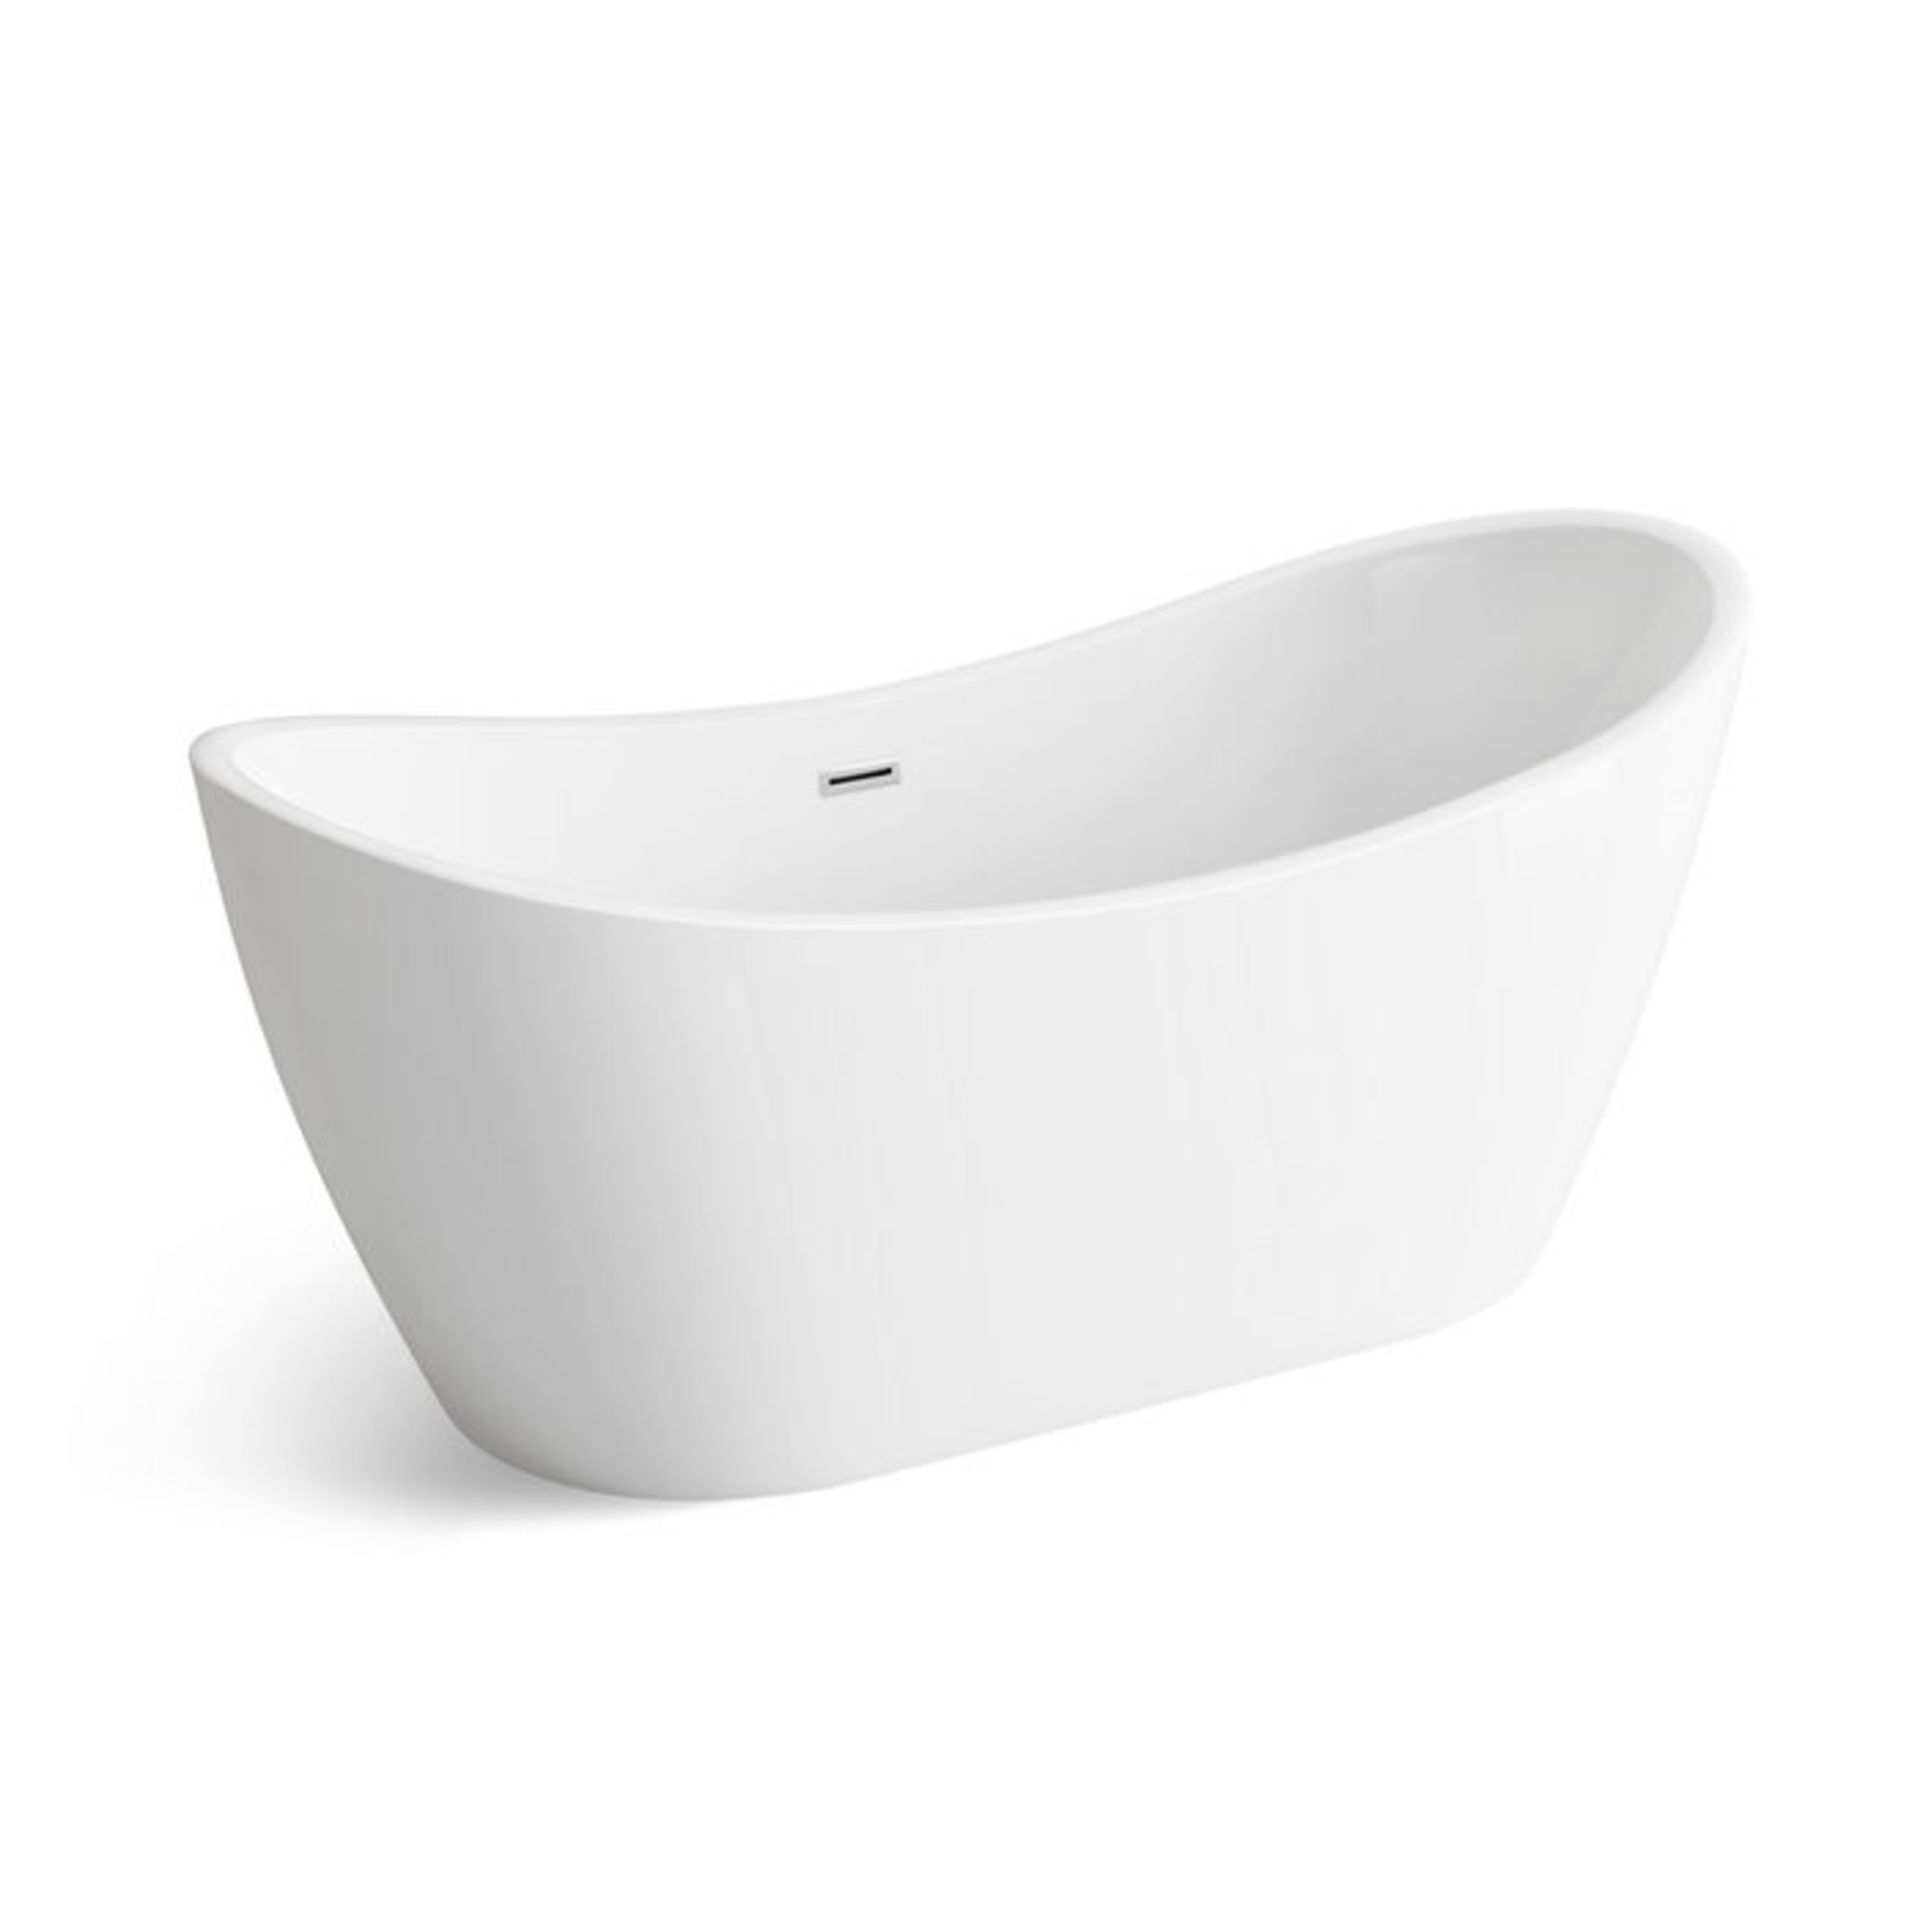 (OS11) 1700mmx710mm Caitlyn Freestanding Bath. Visually simplistic to suit any bathroom interior - Image 3 of 4